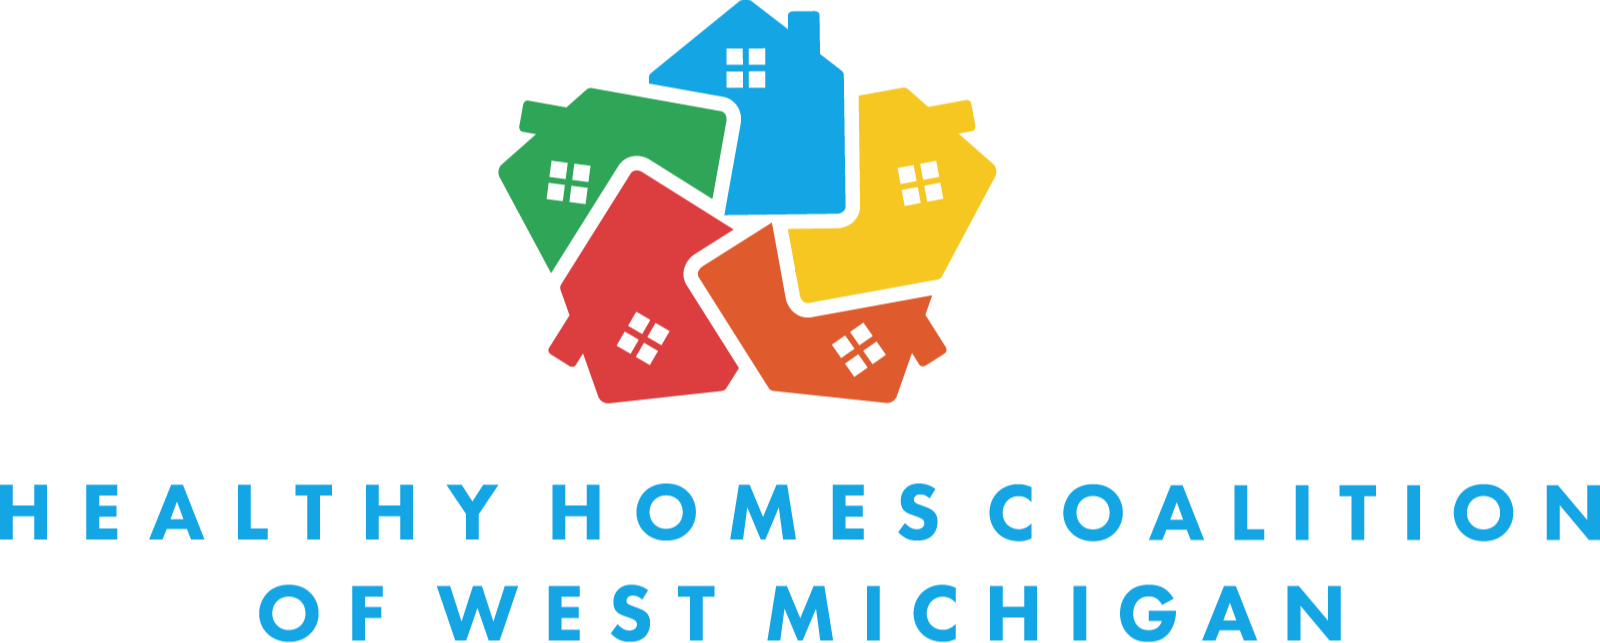 Healthy Homes Coalition of West Michigan logo